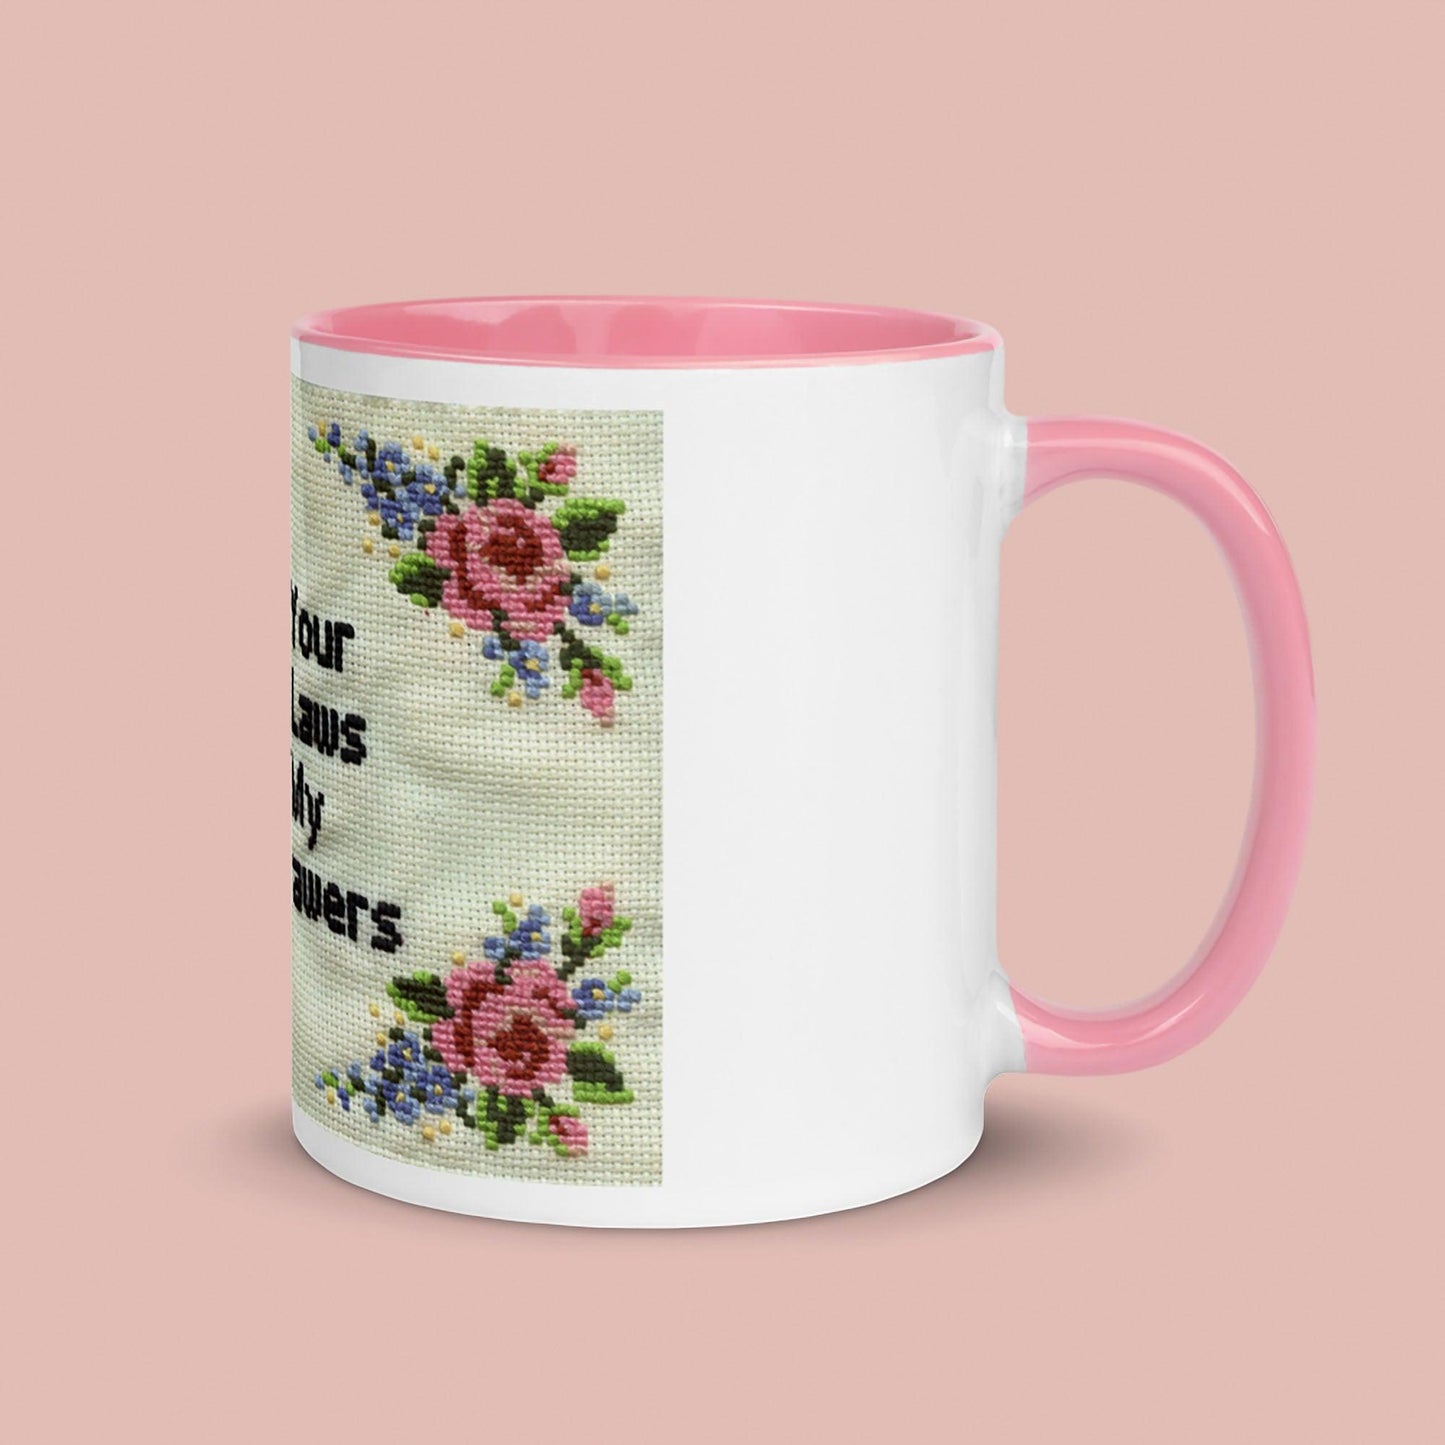 'Keep Your Filthy Laws Off My Silky Drawers' 11oz Mug - Candid Almond